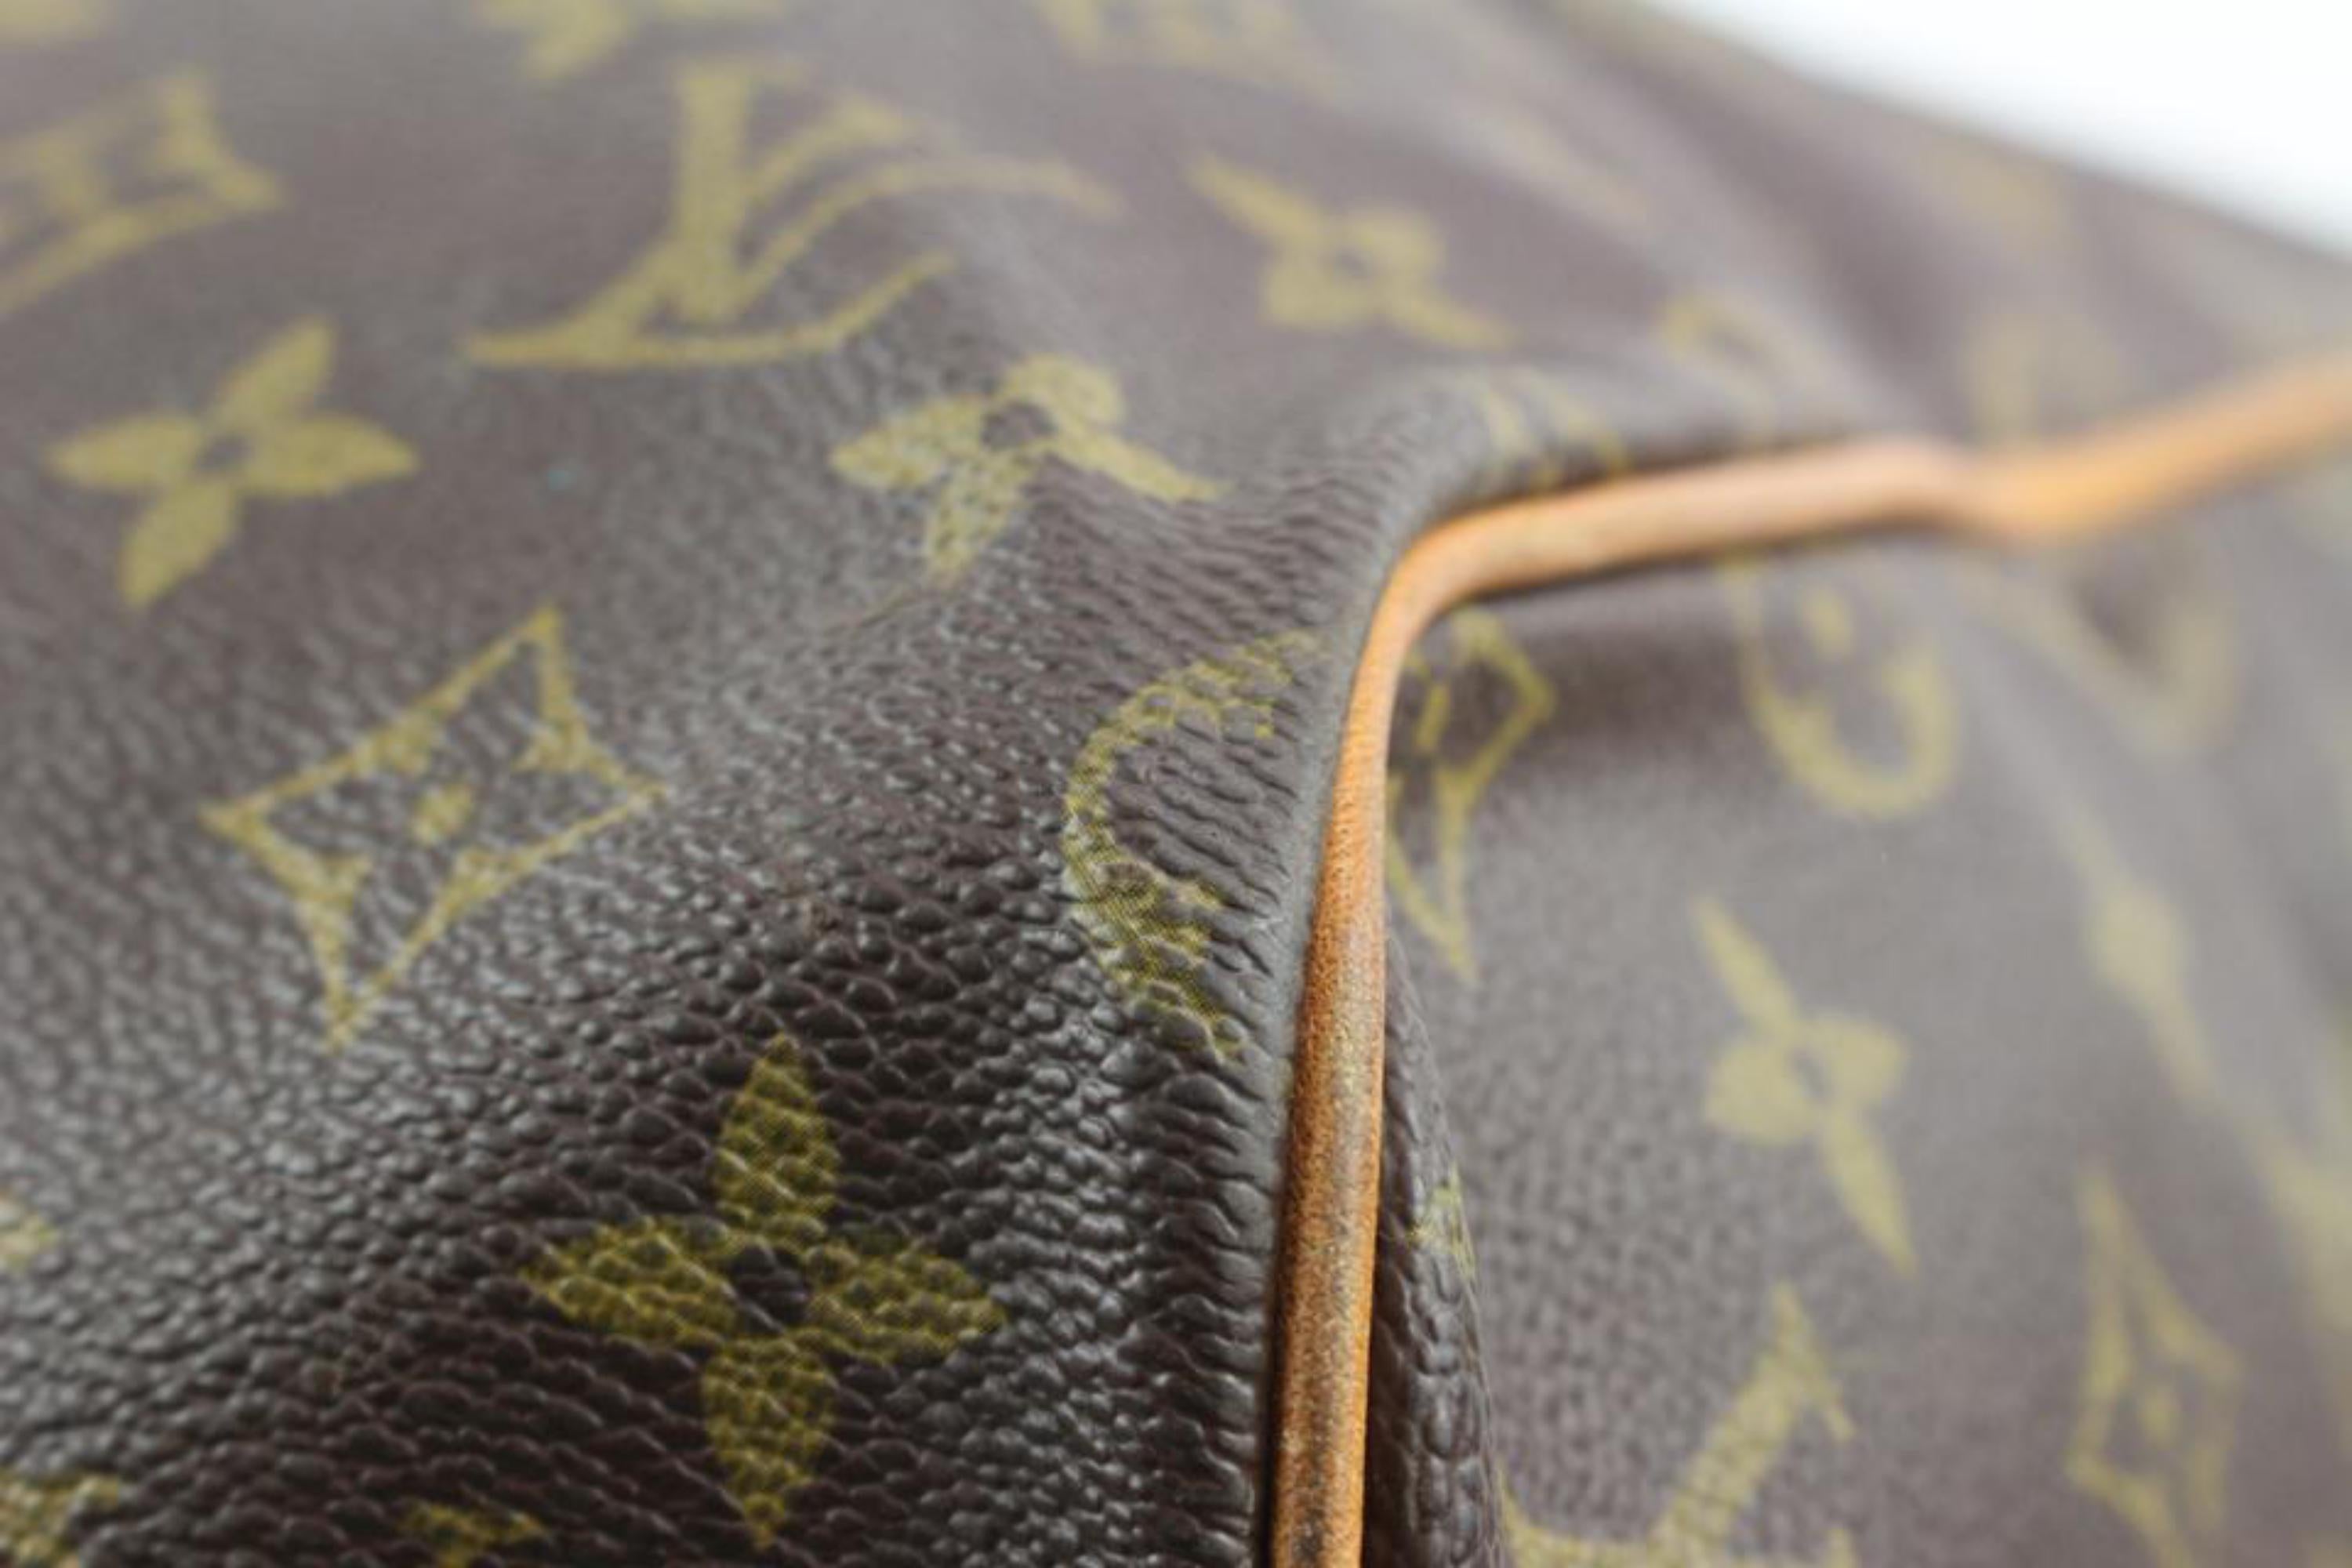 Louis Vuitton Discontinued Monogram Sac Souple 55 Duffle Bag 24lk31s In Fair Condition For Sale In Dix hills, NY